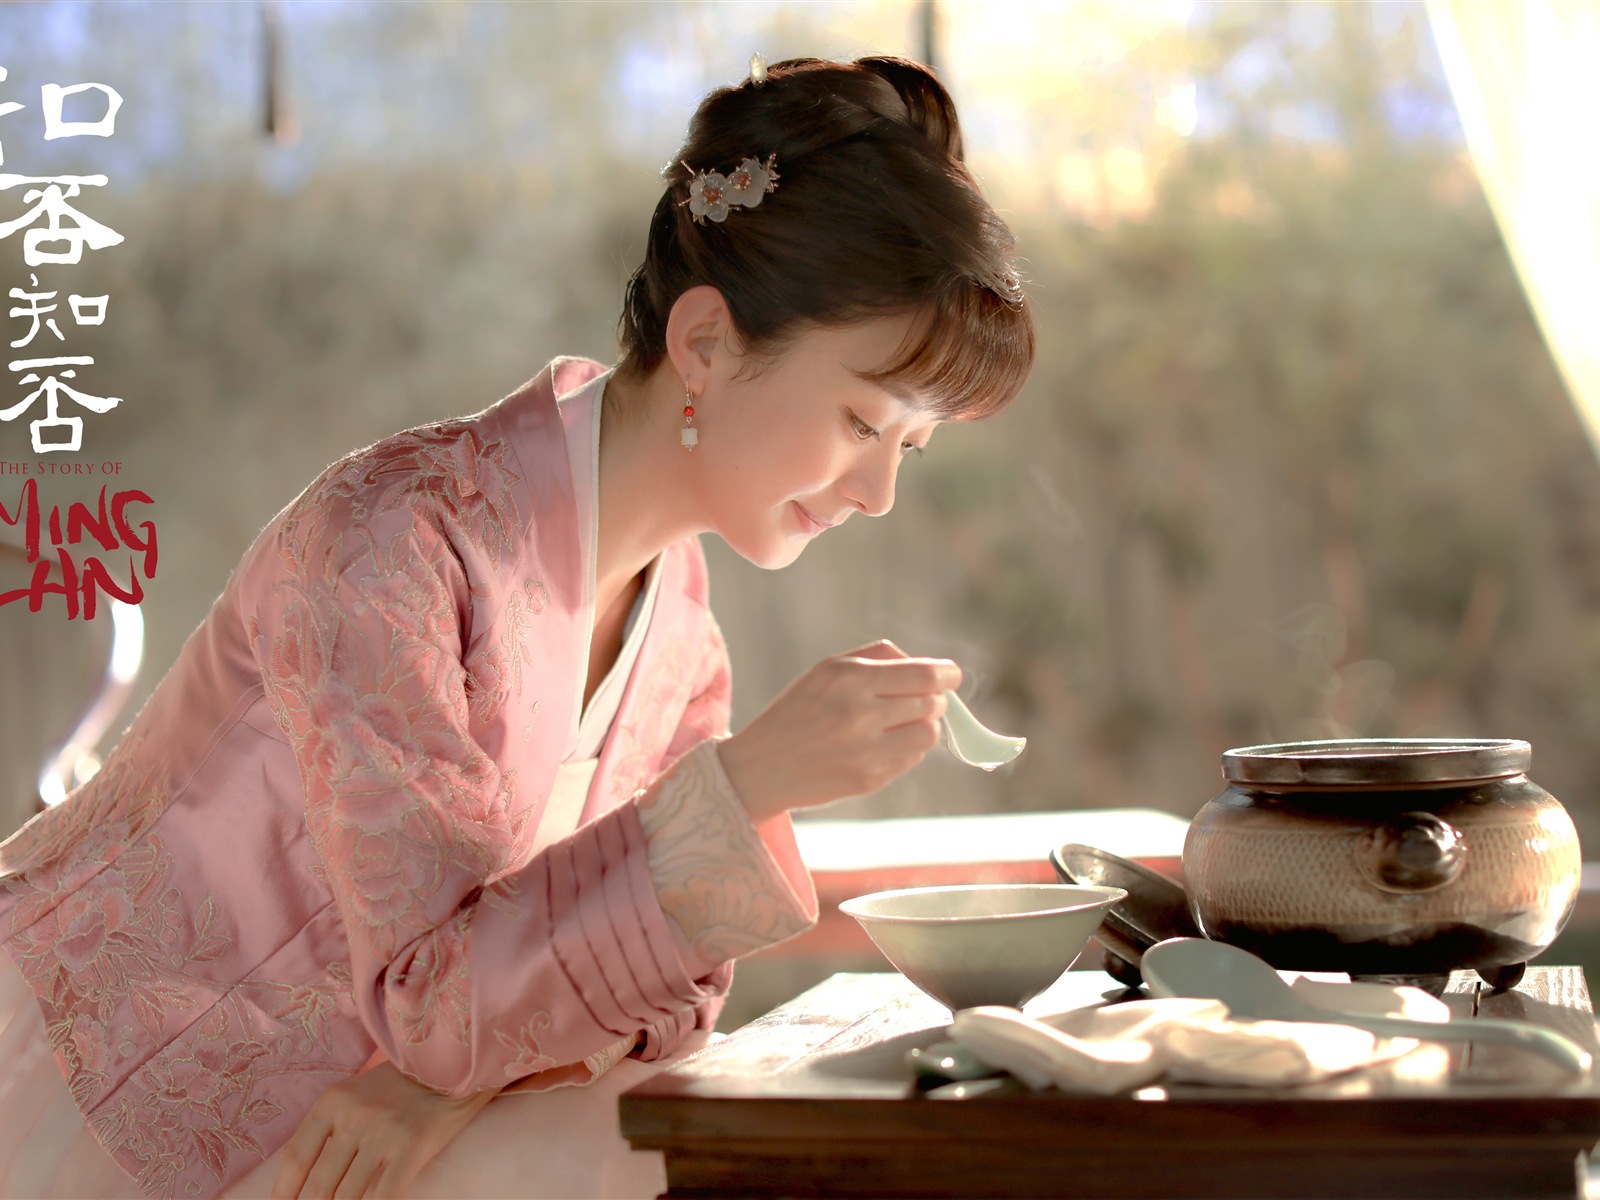 The Story Of MingLan, TV series HD wallpapers #29 - 1600x1200